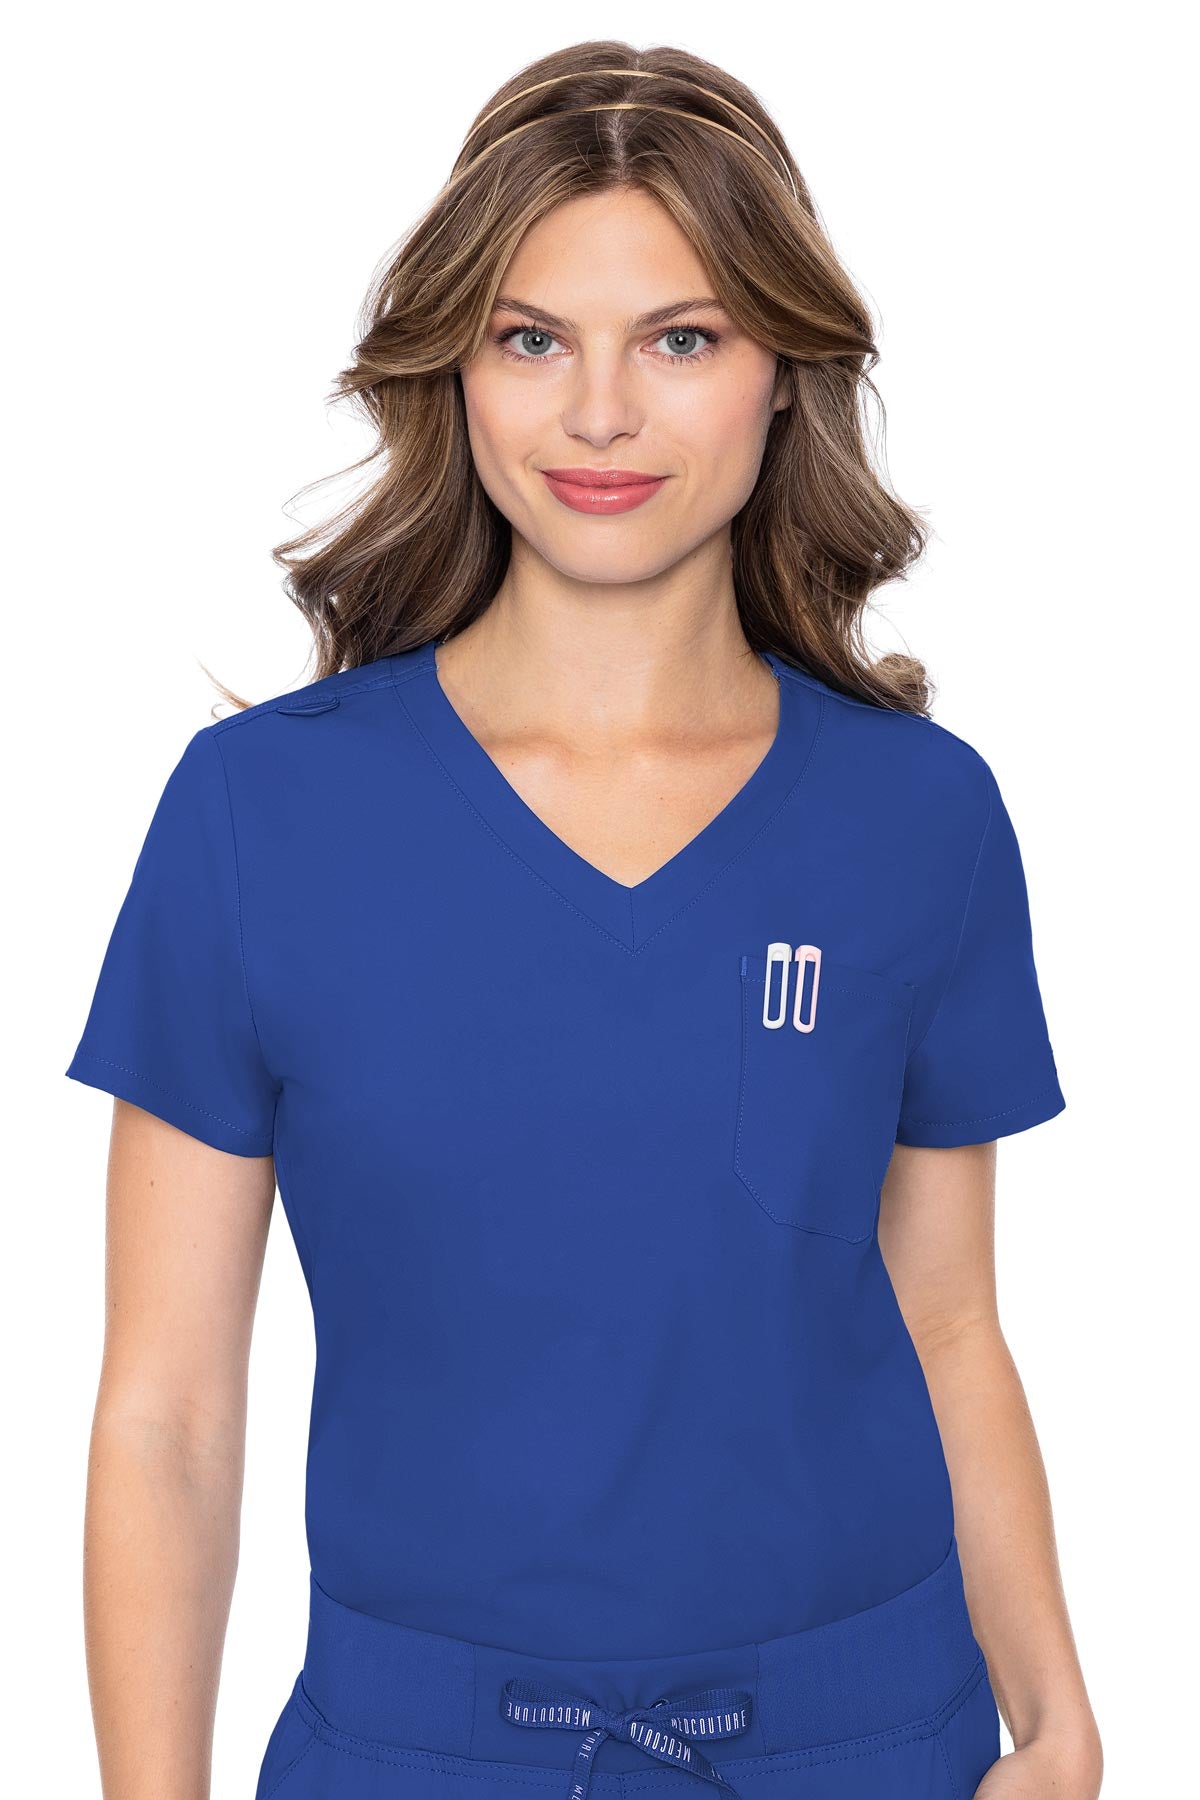 Med Couture 2432 Insight 1 Pocket Women's Tuck-In Top Royal